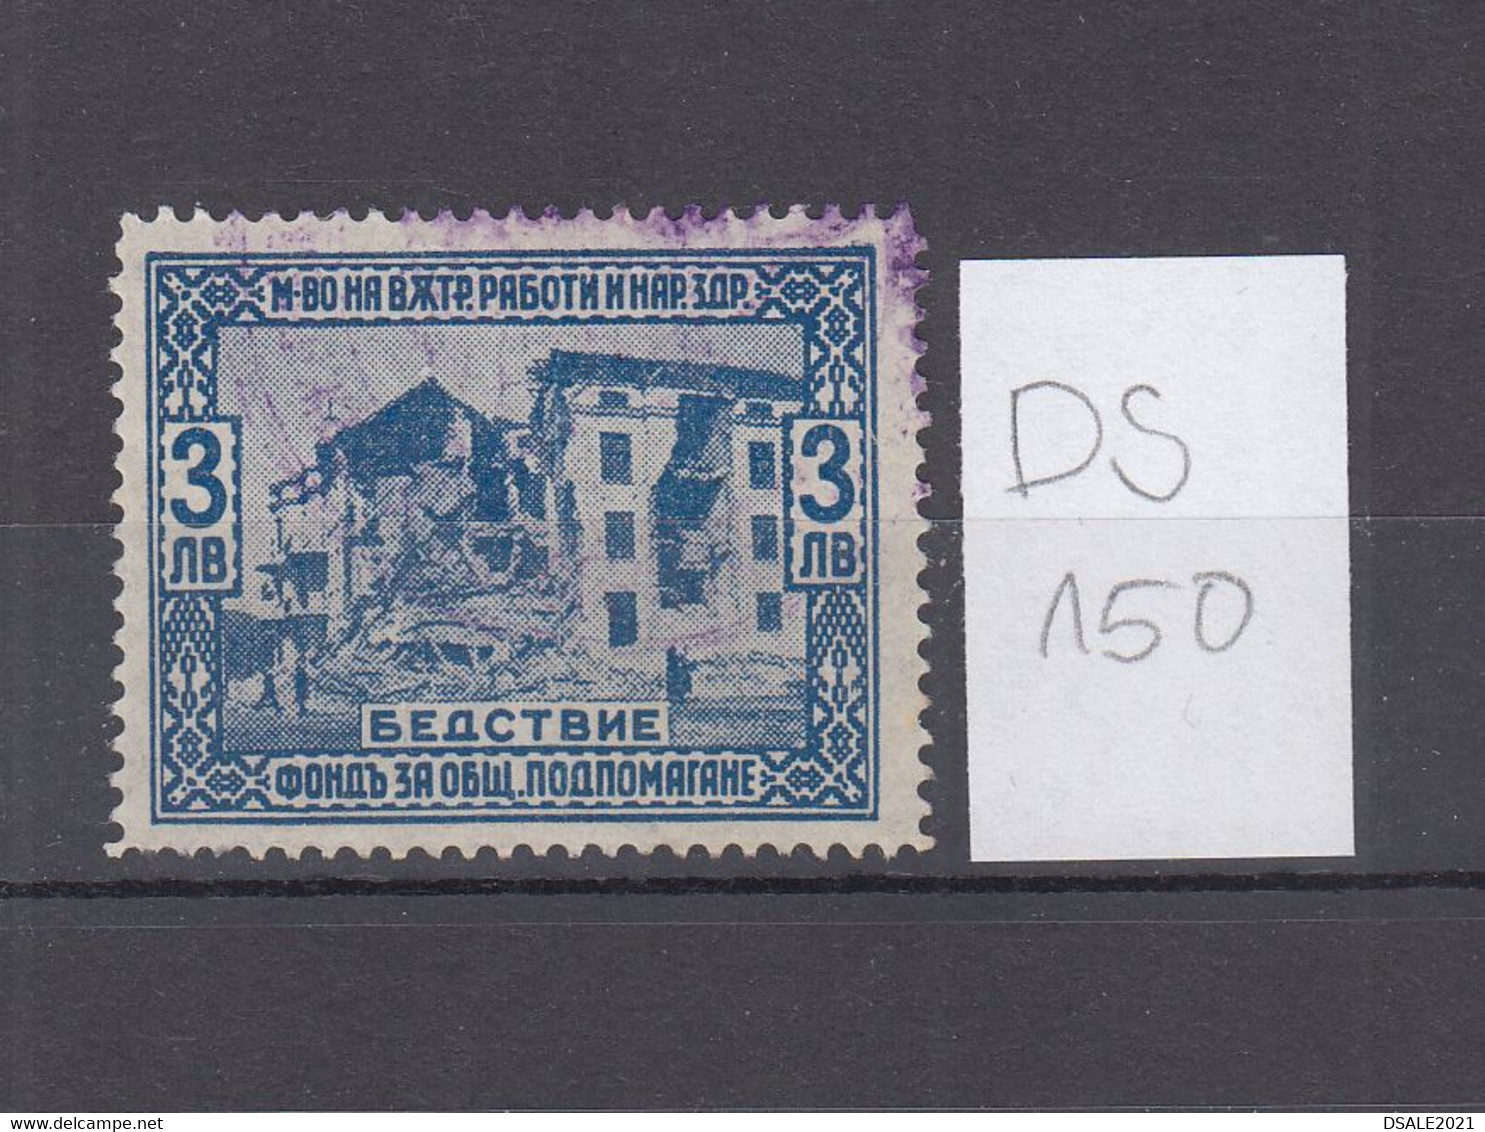 Bulgaria Bulgarie Bulgarije 1930s Disaster Fund 3Lv. Fiscal Revenue Stamp Bulgarian Revenues (ds150) - Official Stamps